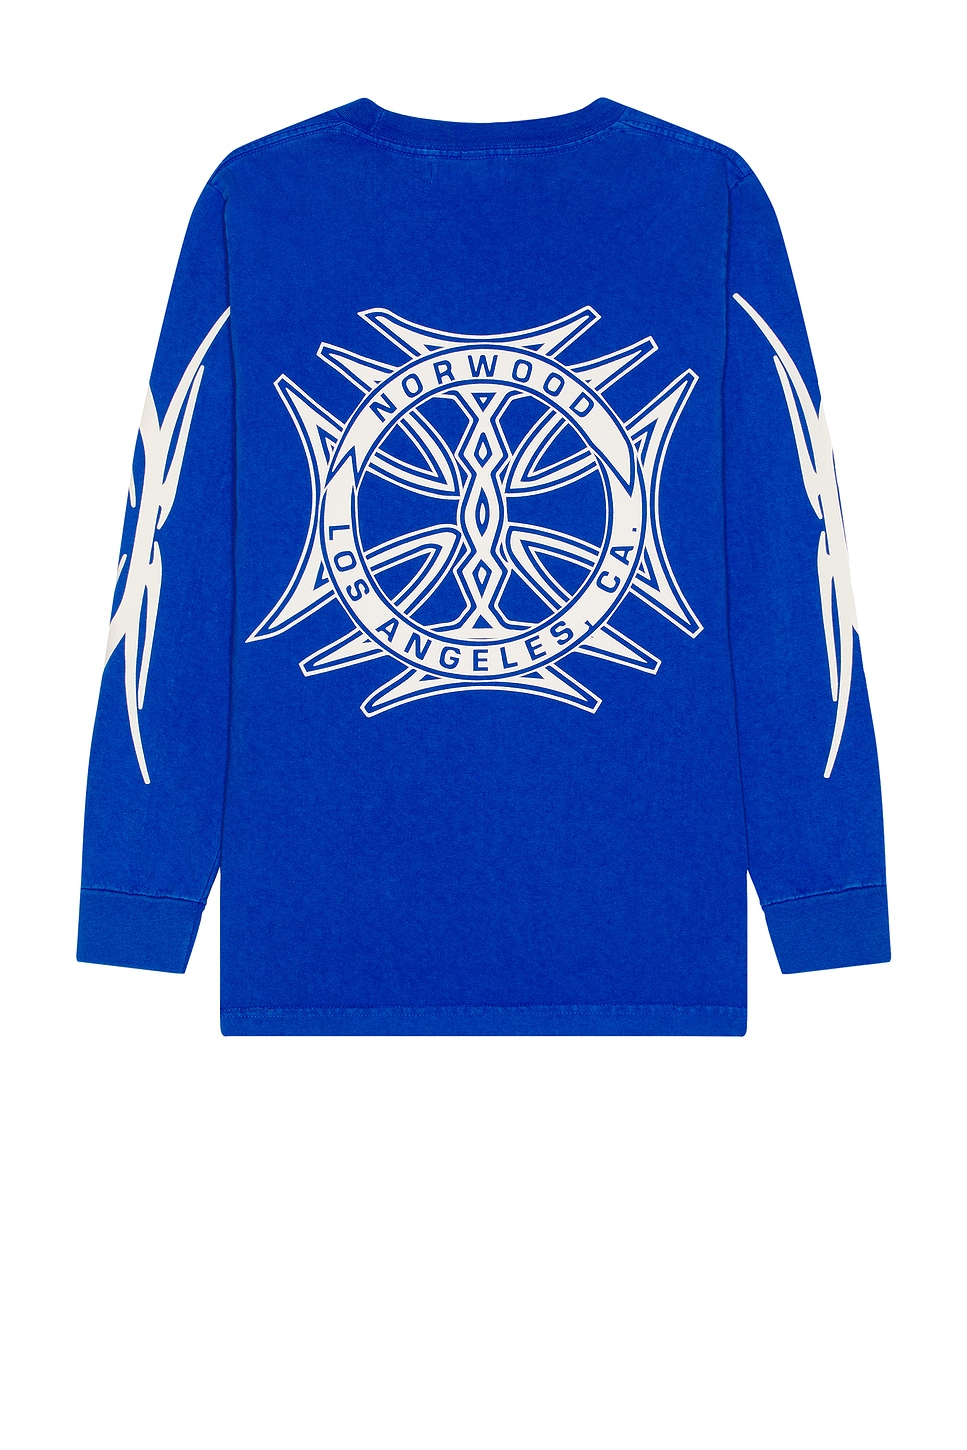 God Willing Long Sleeve Tee in Blue